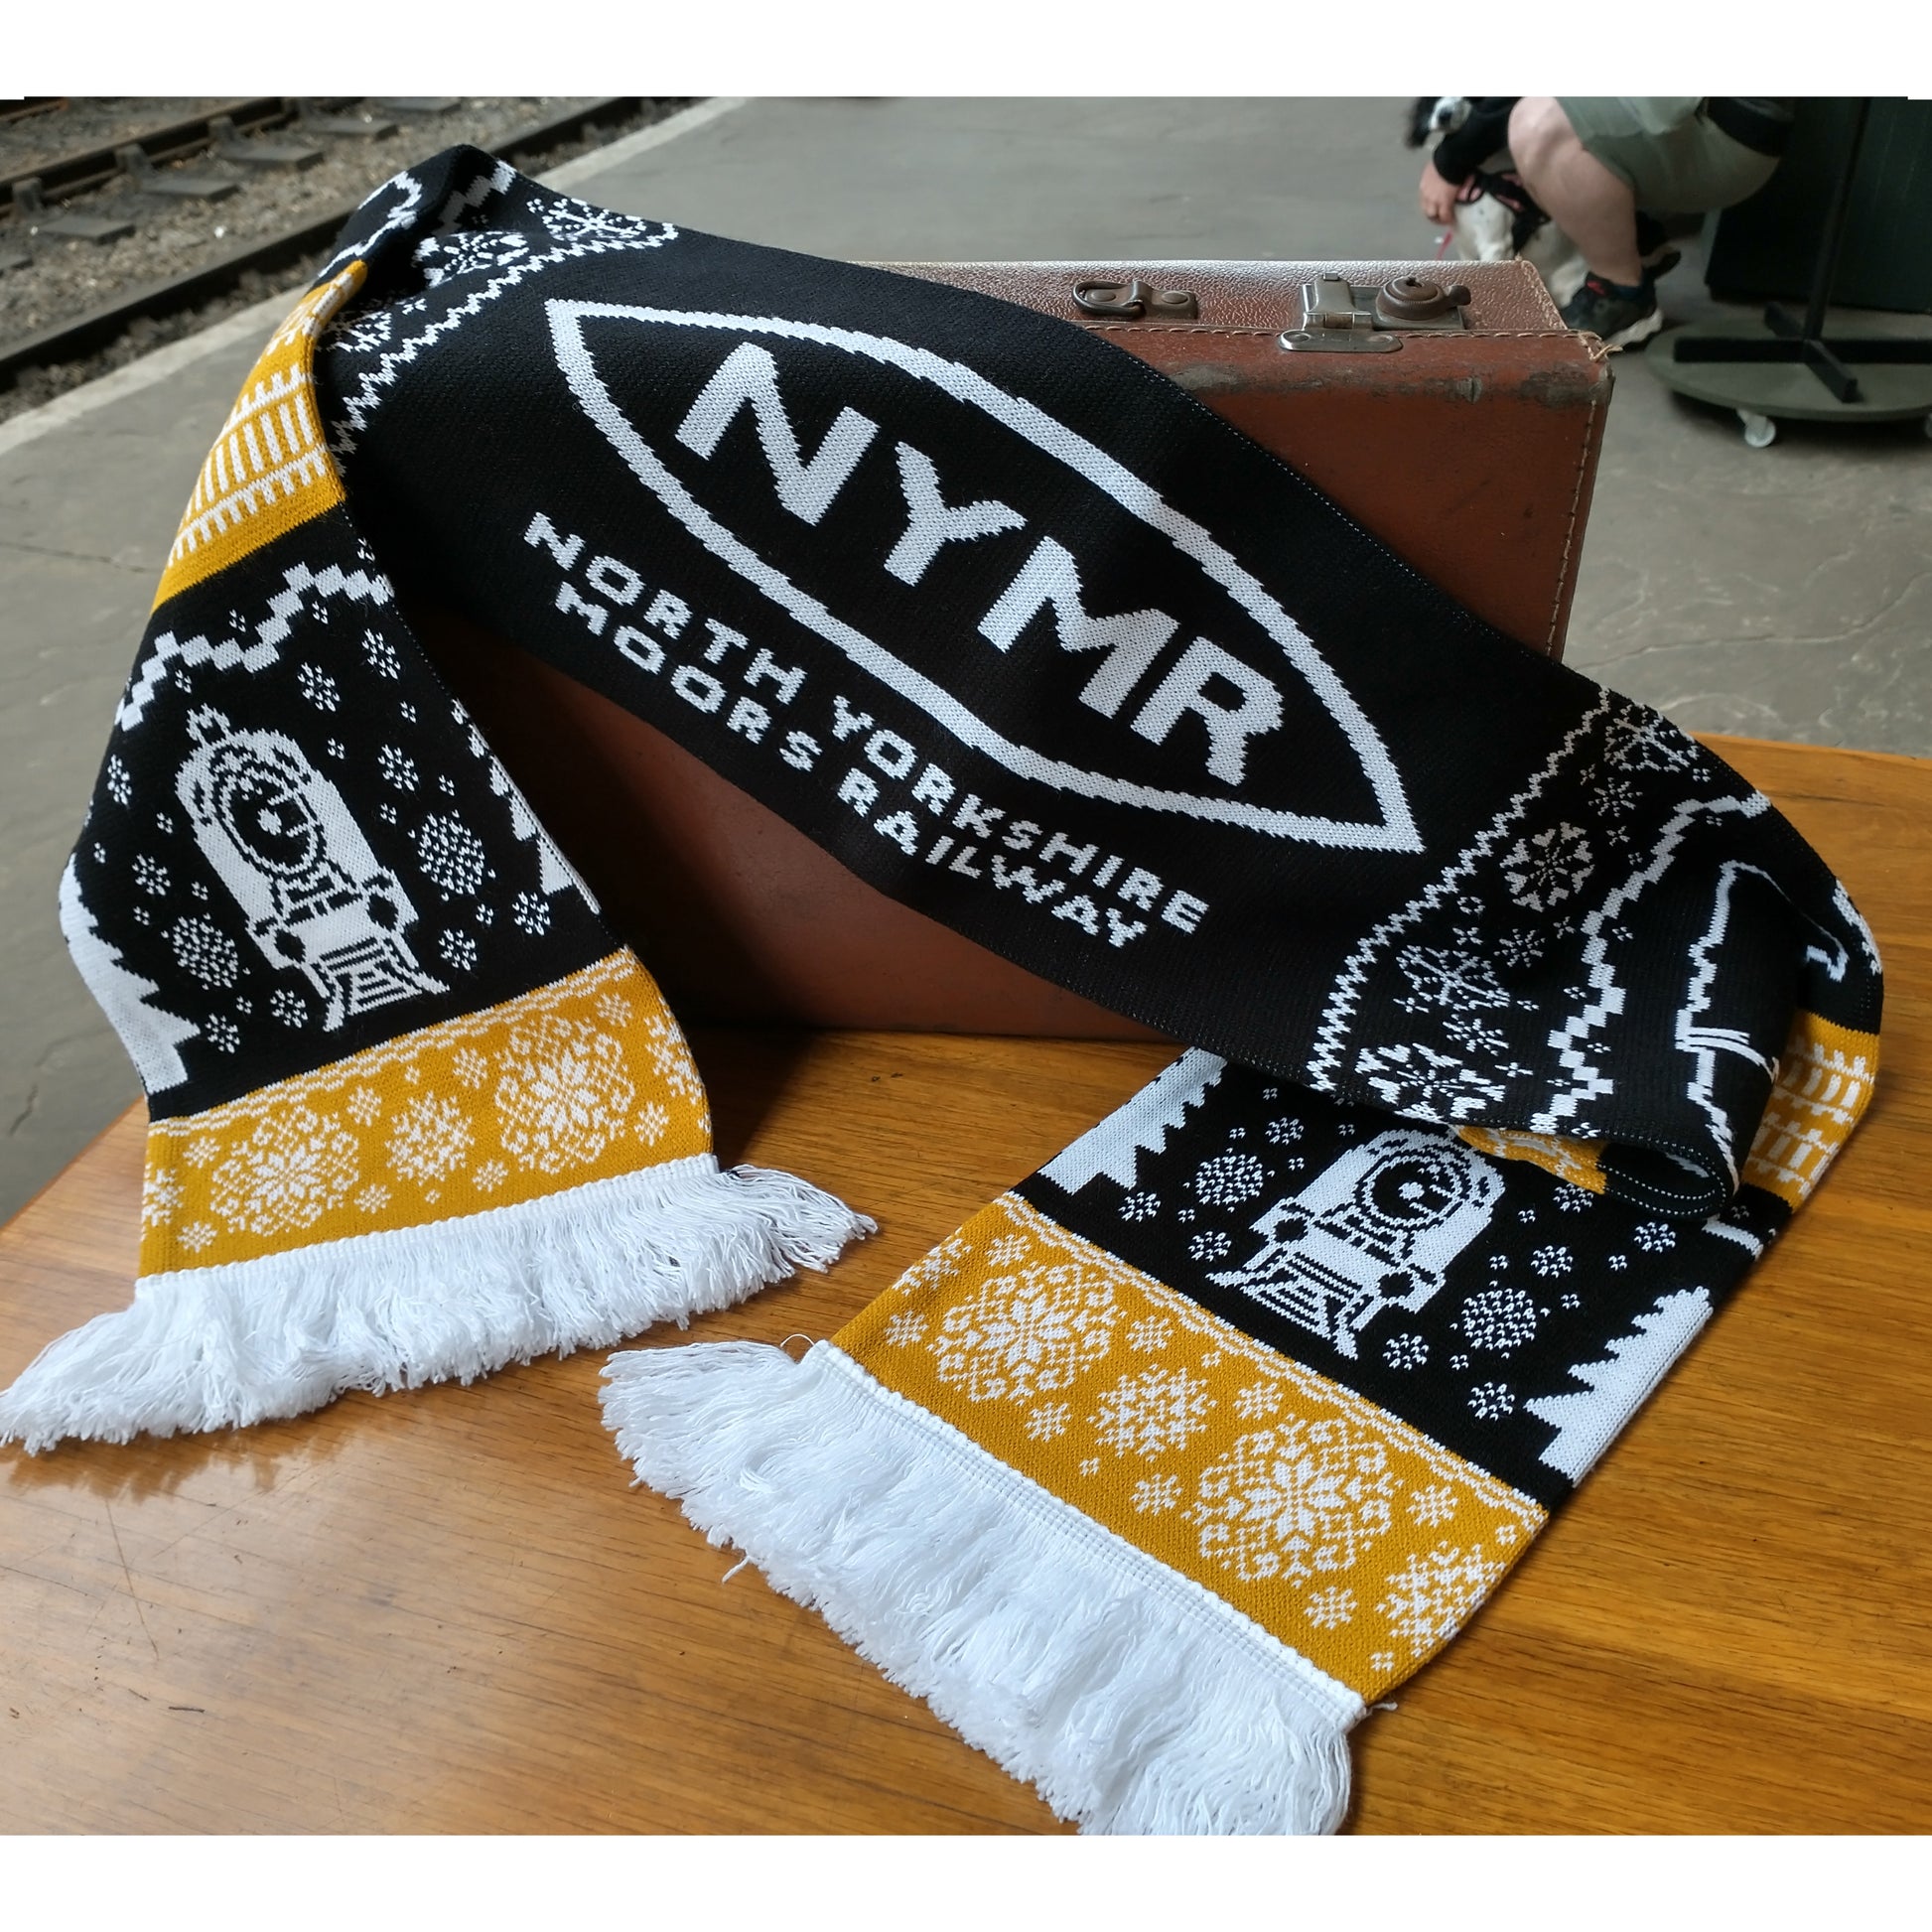 A knitted scarf in black, white and golden threads. With the NYMR logo in white on black, and loco details. Snowflakes and track motifs are white on a golden background.